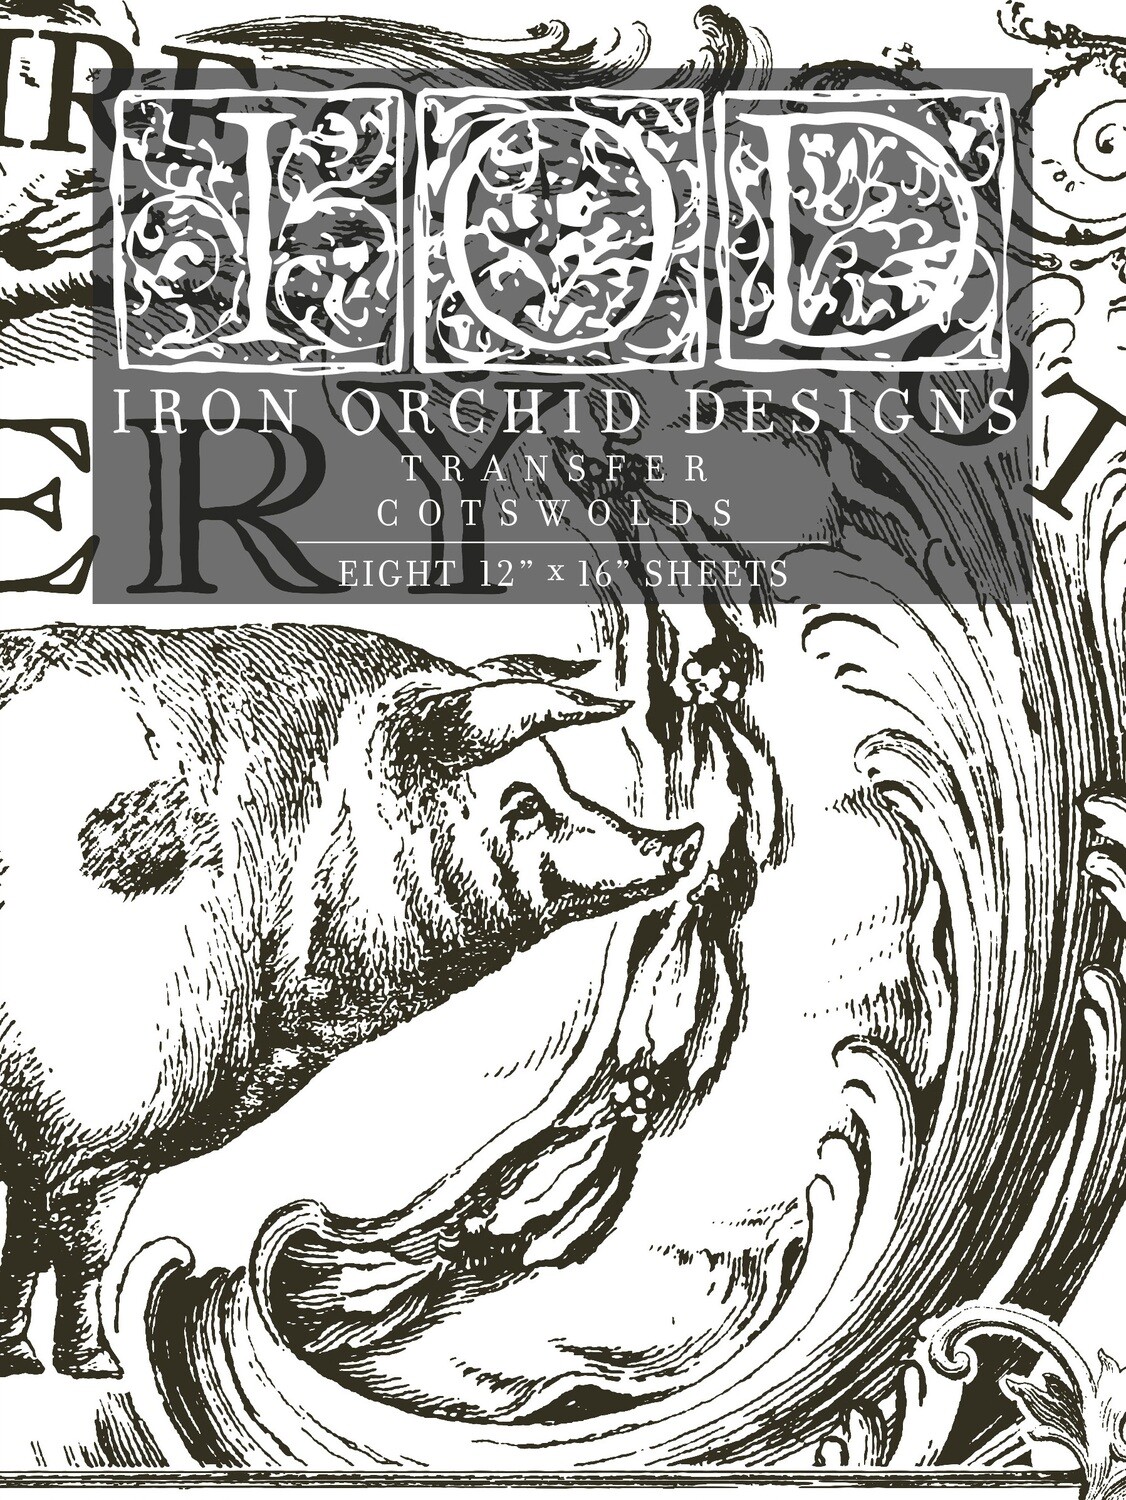 IOD COTSWOLDS DECOR TRANSFER Iron Orchid Designs